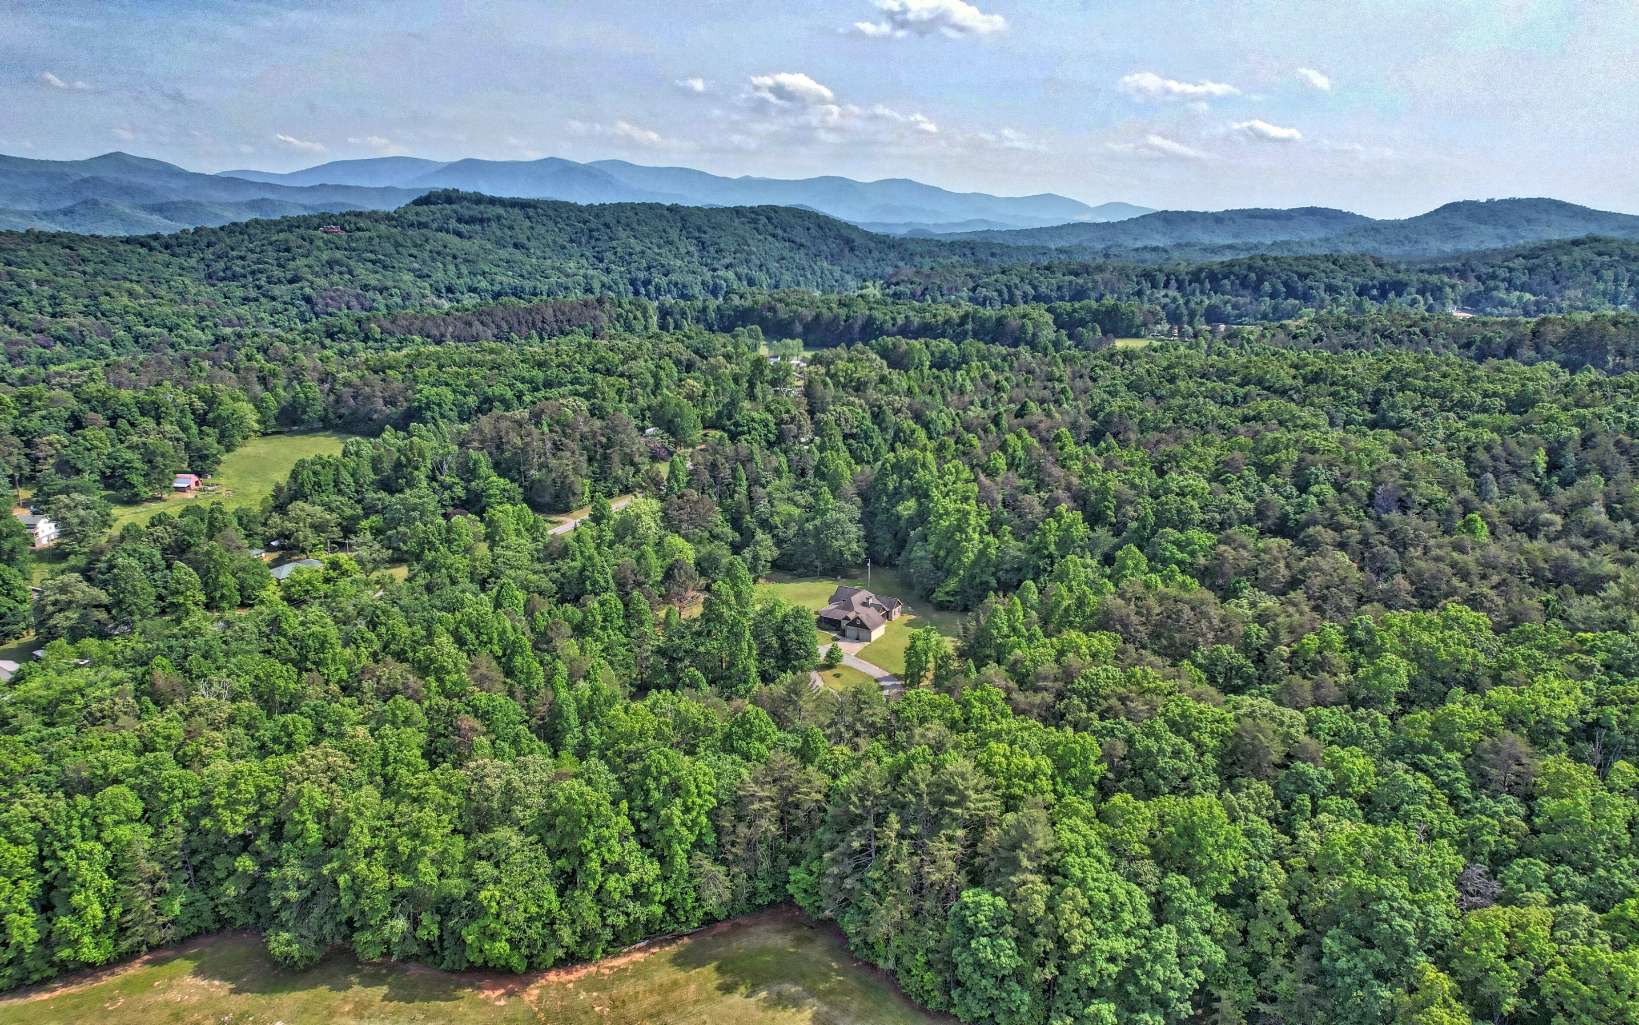 Beautiful Country Estate on Private 16.56 acres + option for add’l 3 acres less than 5 miles to downtown Blue Ridge! Master on Main living. Open floor plan, large stone fireplace/wood burning stove, exposed beams & cathedral ceilings. 3 large bedrooms on main + bedroom upstairs. 2 full/1 half bath on main. Master bath has double sinks, garden tub & separate shower w/ multiple shower heads. Walk-in closets. Separate HVAC upstairs. Large chefs kitchen w/ breakfast nook. Separate formal dining room. Granite countertops/custom cabinets throughout. Oversized laundry room w/ custom cabinetry & space for utility sink. 2 car garage w/ walk up attic. Hot/cold running water in garage & to outdoor shower. Detached 20x40 workshop w/ roll-up door to accommodate boat/RV. Partially finished basement w/stacked stone hearth piped to accommodate a wood stove, stained concrete floors, stubbed for full bath-window, garage door & walk-in door entries. Front entrance wired for auto gate install. Pristine Mountain Spring Water w/ whole house filtration system. Springs are same as those used by Blue Ridge Water Bottling Co! Front & back screen porches w/ custom blinds & ceiling fans. Crawl space areas lined w/ plastic & foam insulation. Over a mile of trails for walking or riding (wide enough for full sized UTV). RV power hook-up. Property would make a beautiful horse farm or estate. Several locations for additional homes or small cabins. Too much to list. Priced to sell!